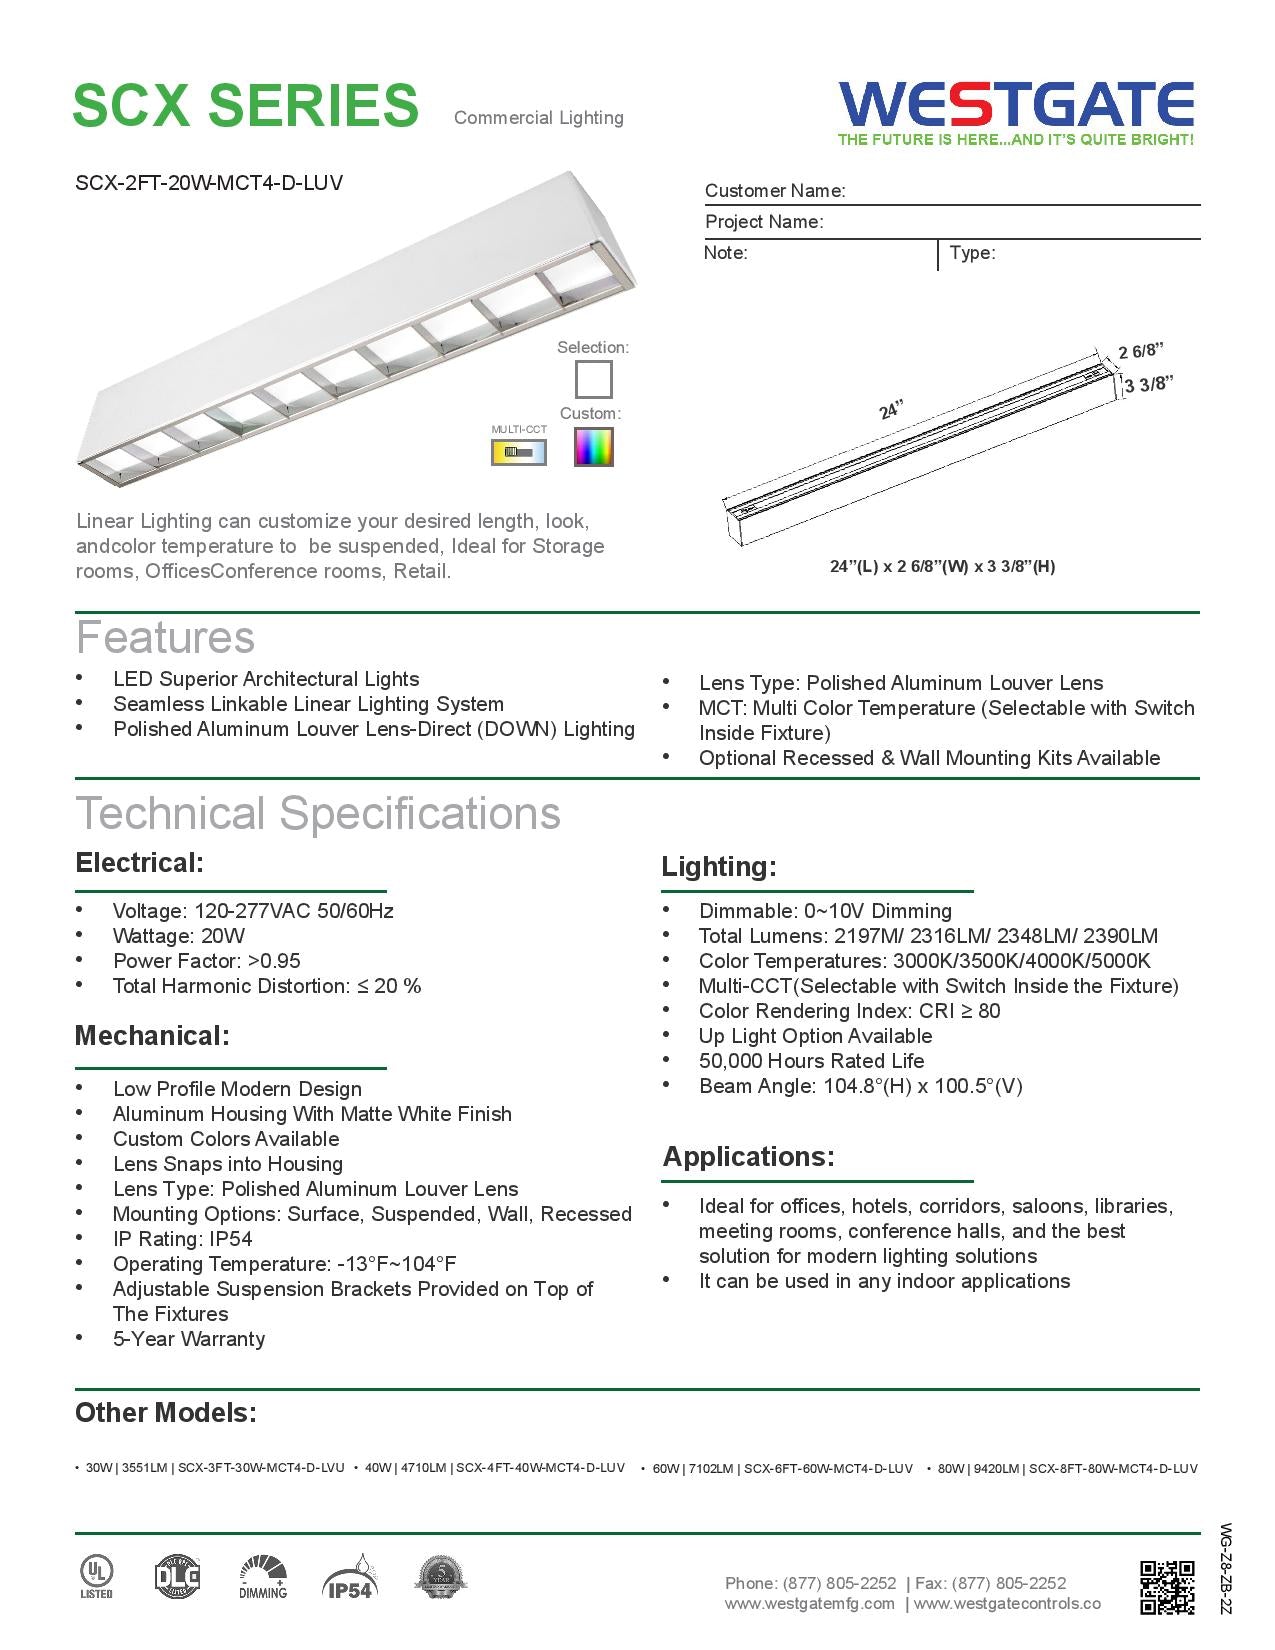 LED 2-3/4" Superior Architectural Seamless Linear Lights with Louver Lens